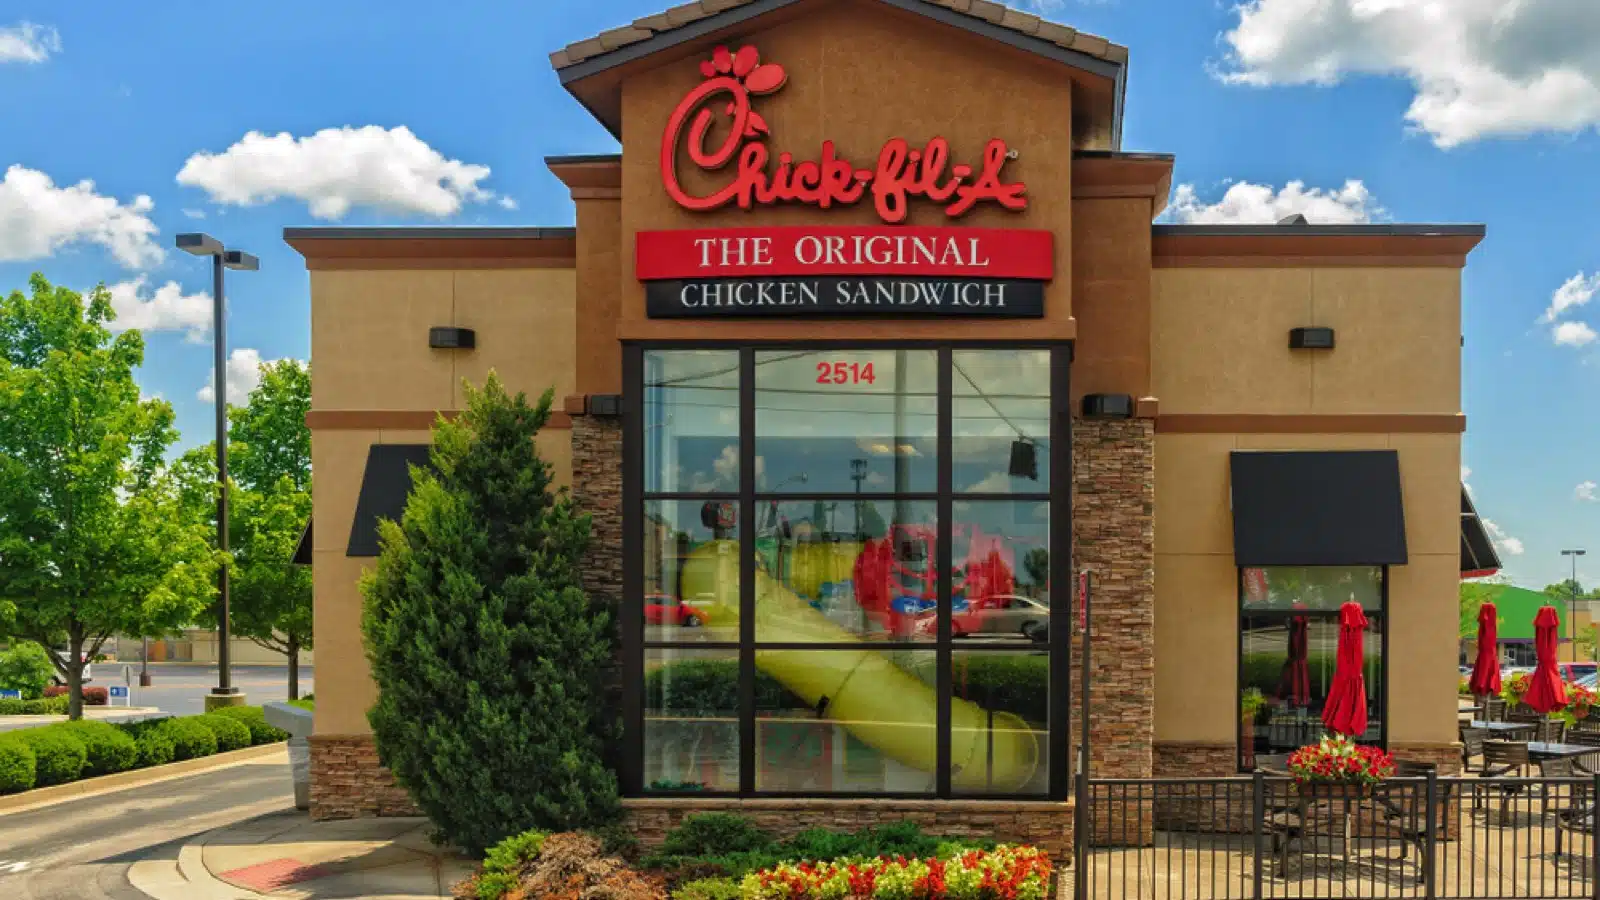 Chick-fil-A Photographed 7/8/2018 in Lexington, Kentucky (USA) Chick-fil-A holds lead as top fast-food restaurant for third year.